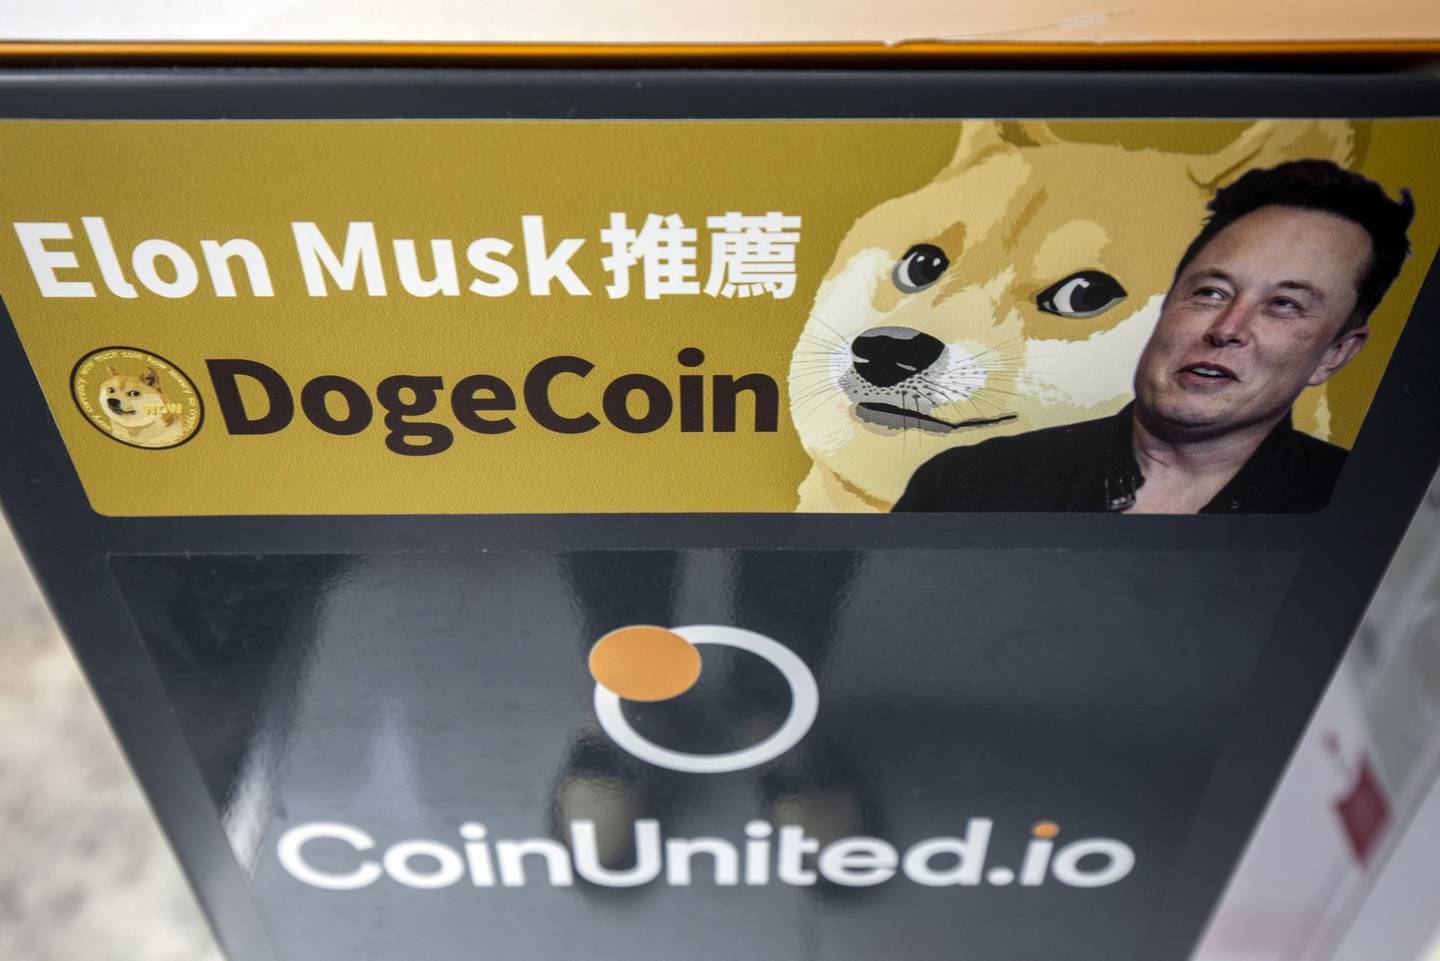 The dog that is the image of Dogecoin, together with Elon Musk